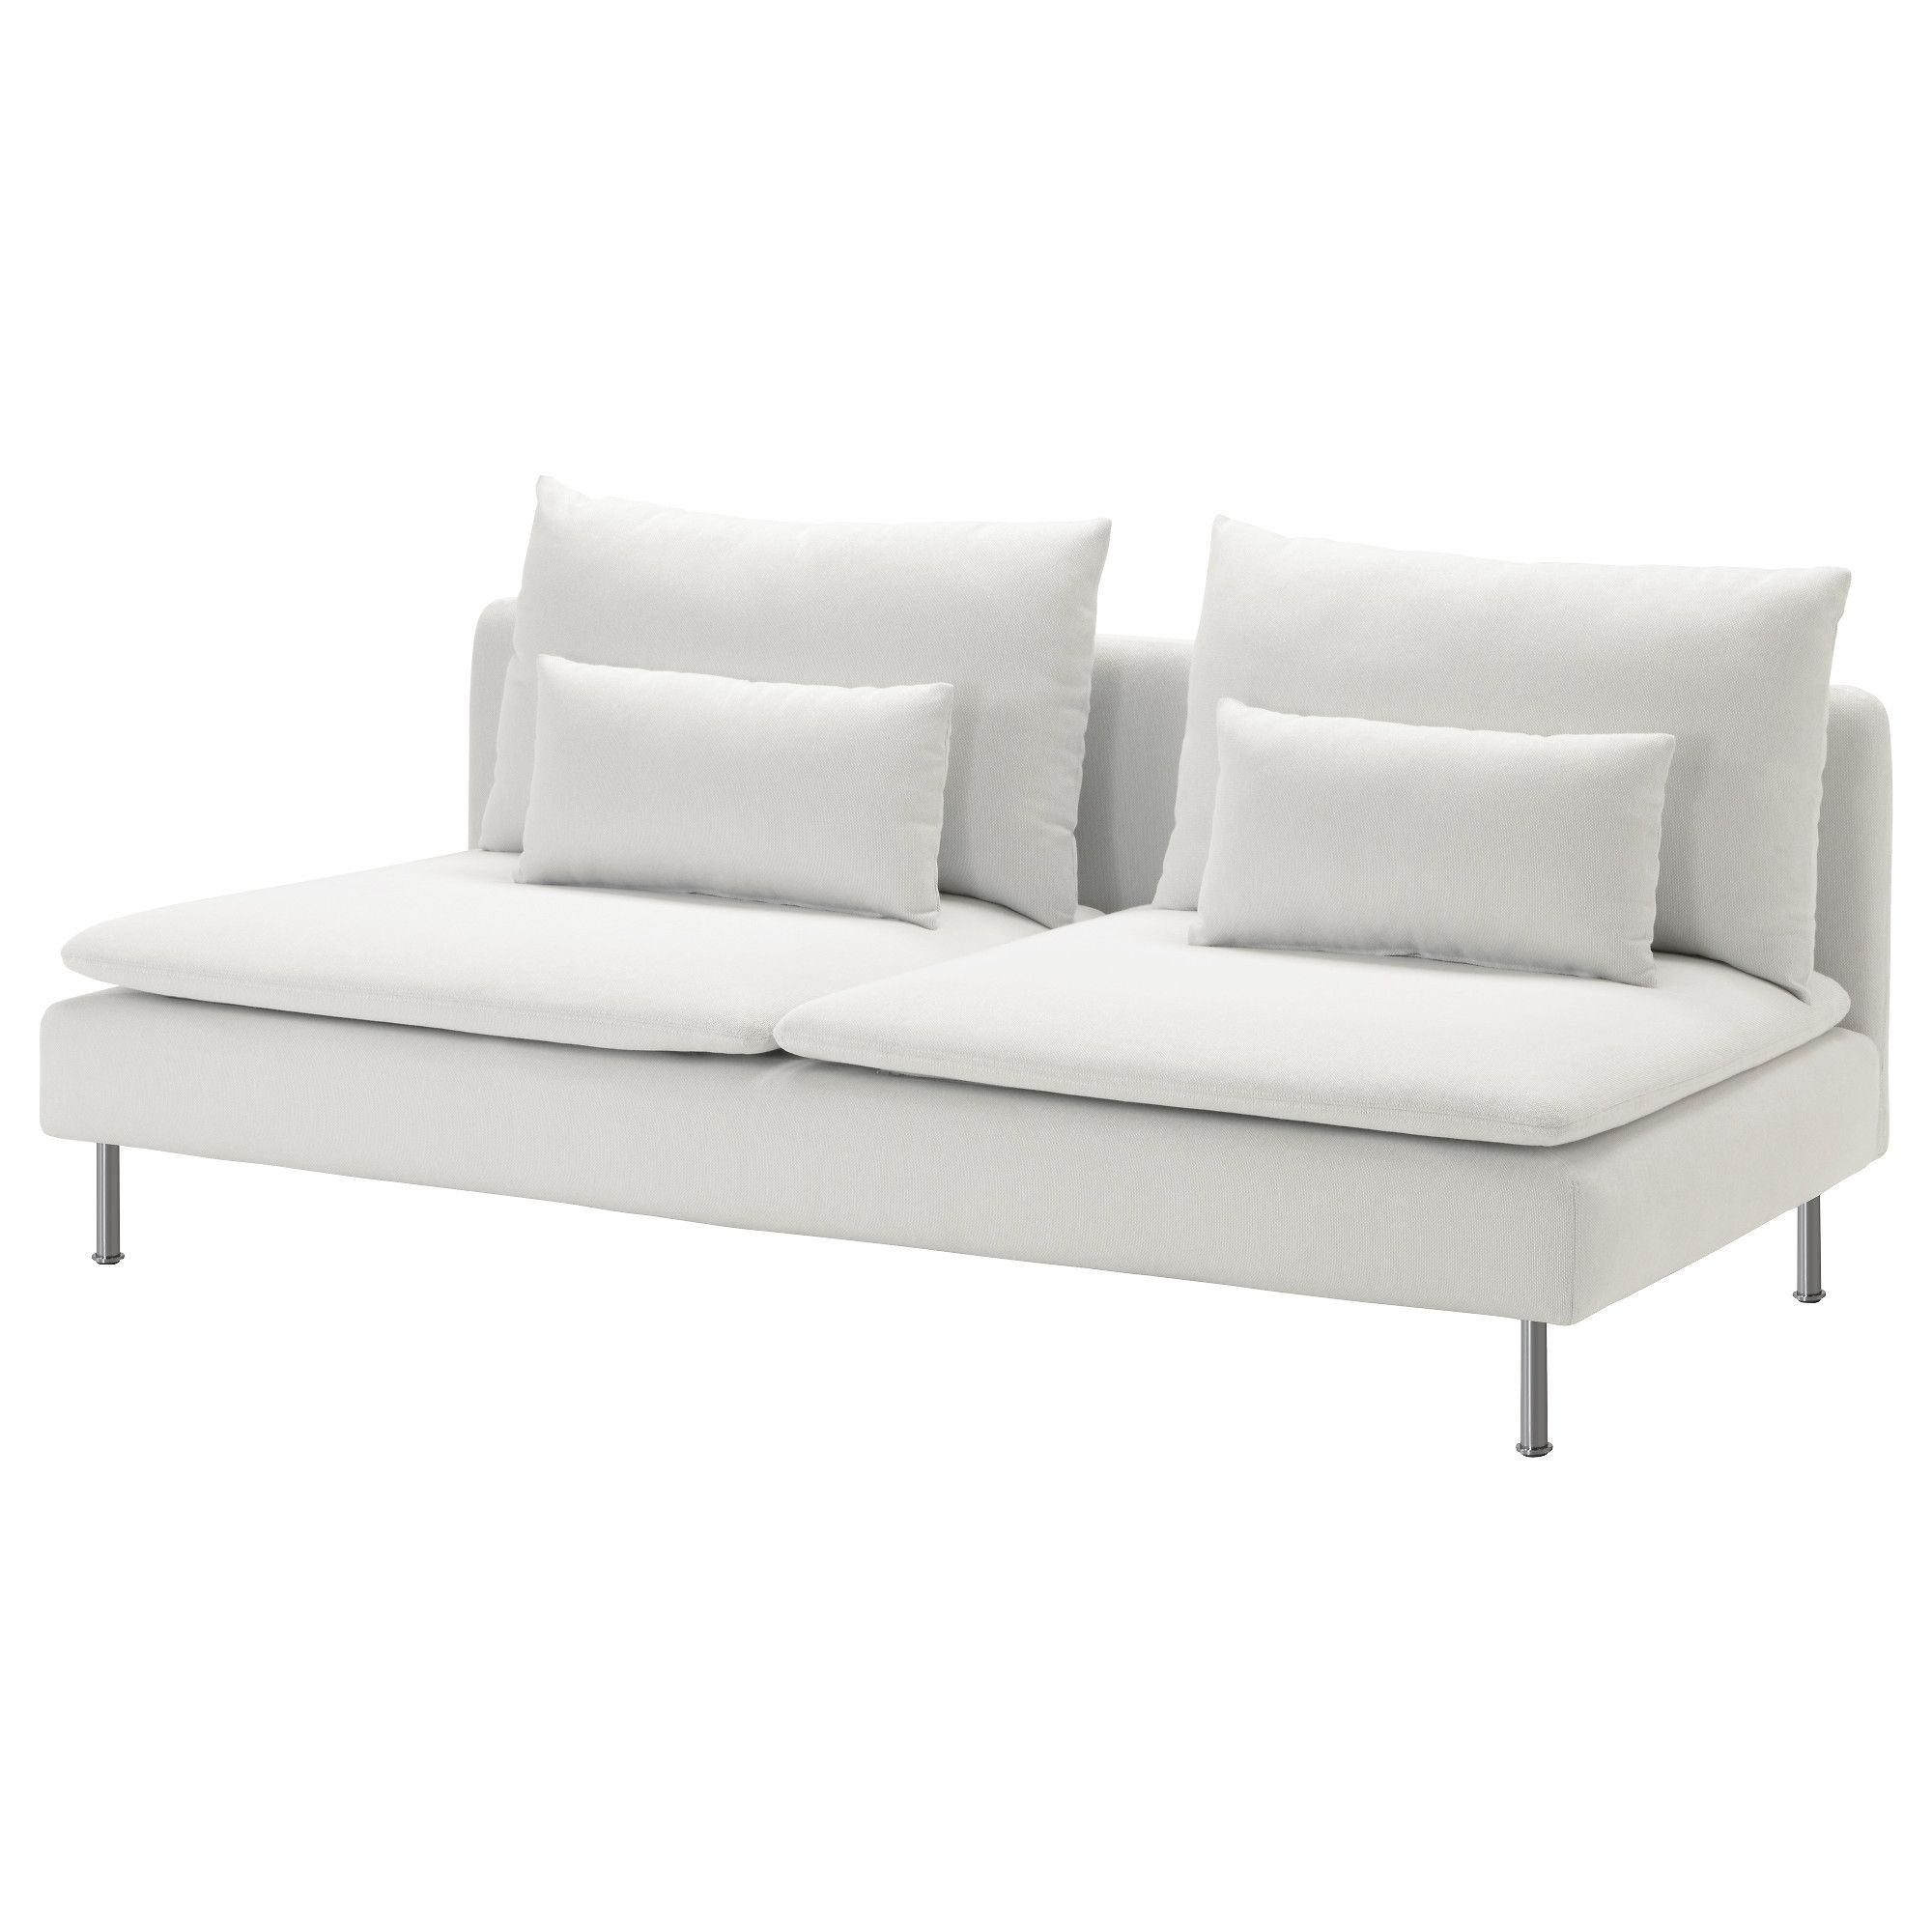 Söderhamn Sofa Section – Finnsta White – Ikea Pertaining To Sectional Sofas At Ikea (View 4 of 10)